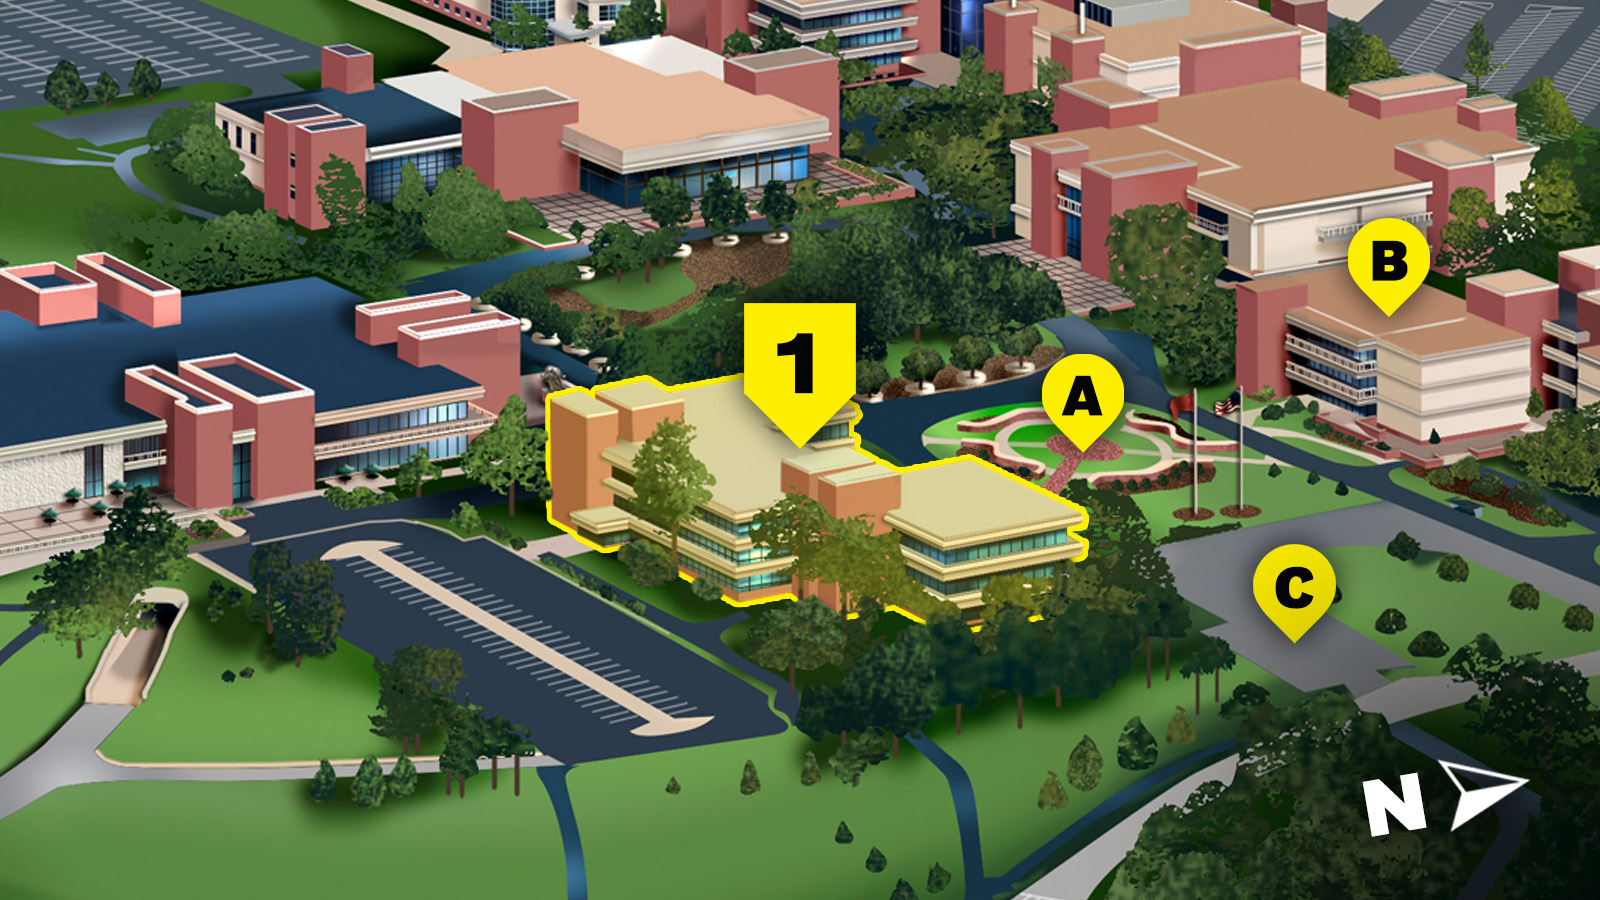 campus map highlight areas near rendleman hall